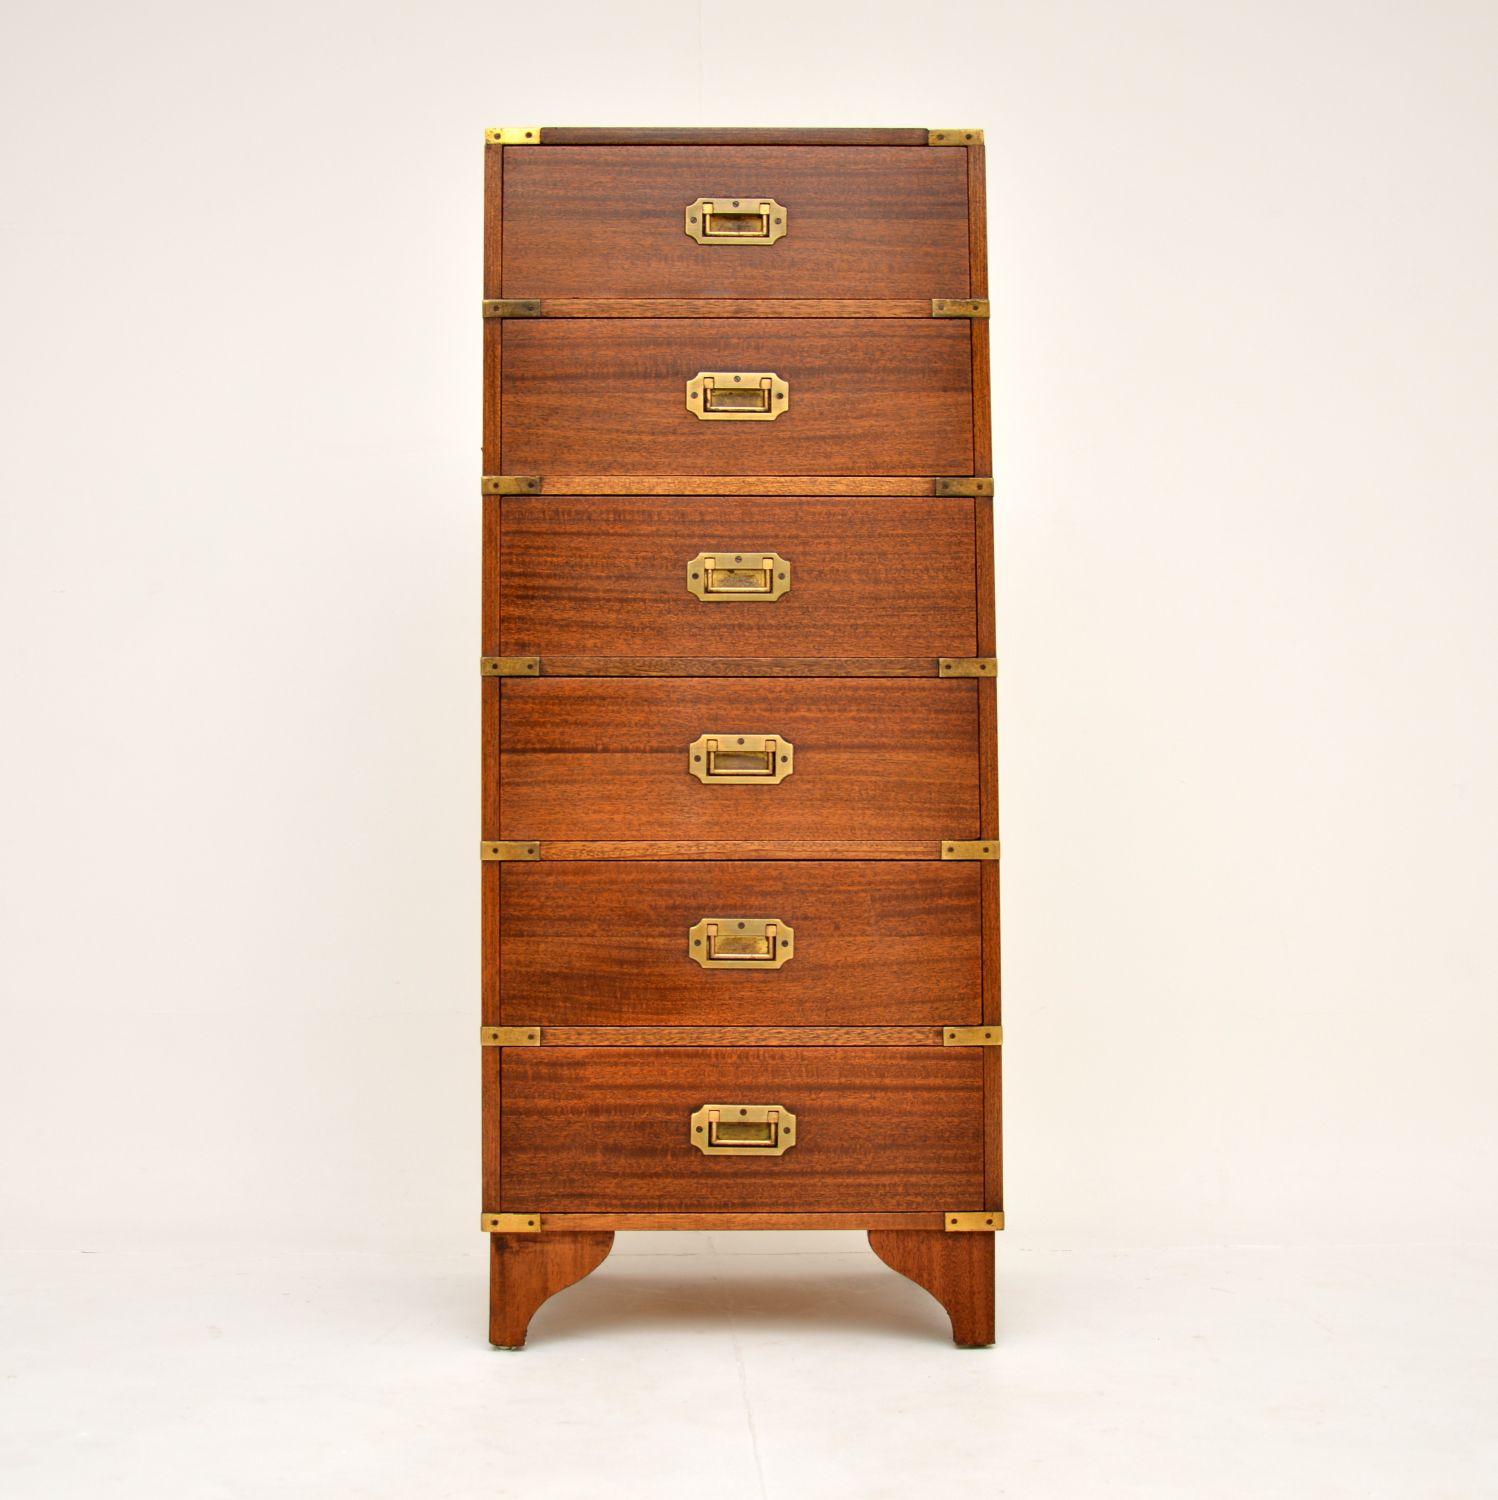 British Antique Military Campaign Chest of Drawers